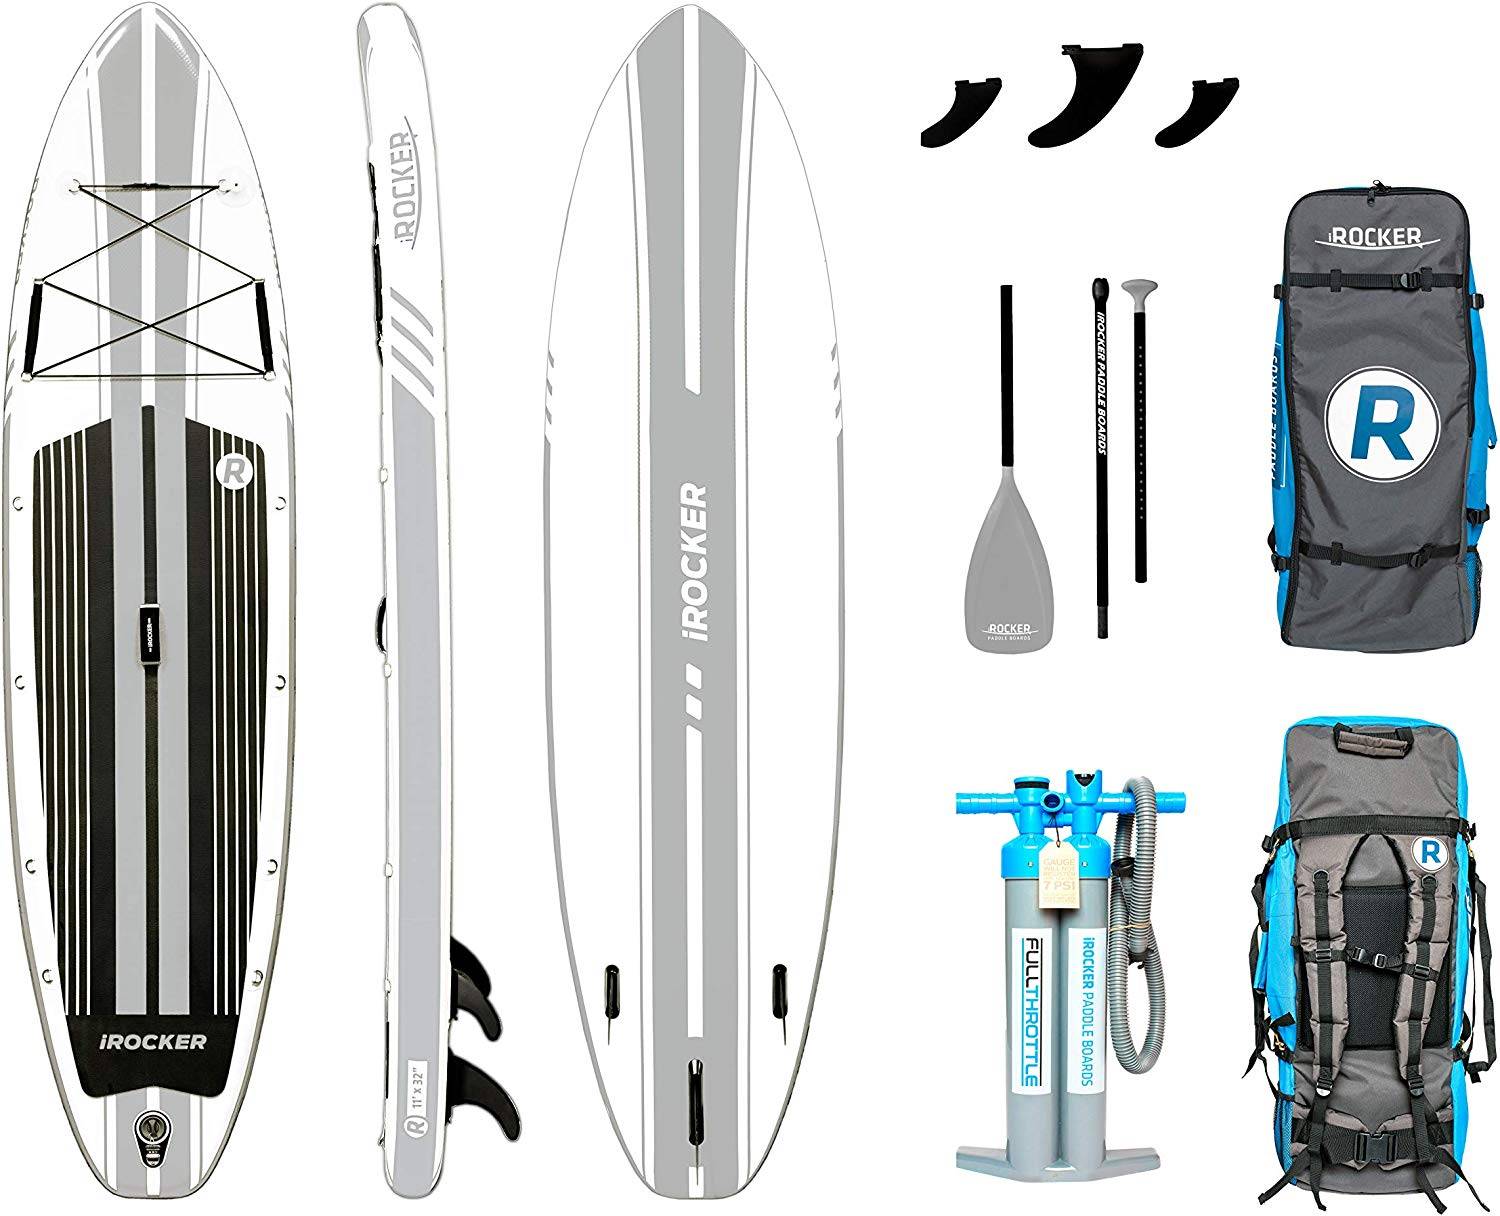 iROCKER 11 All Around paddle board Review